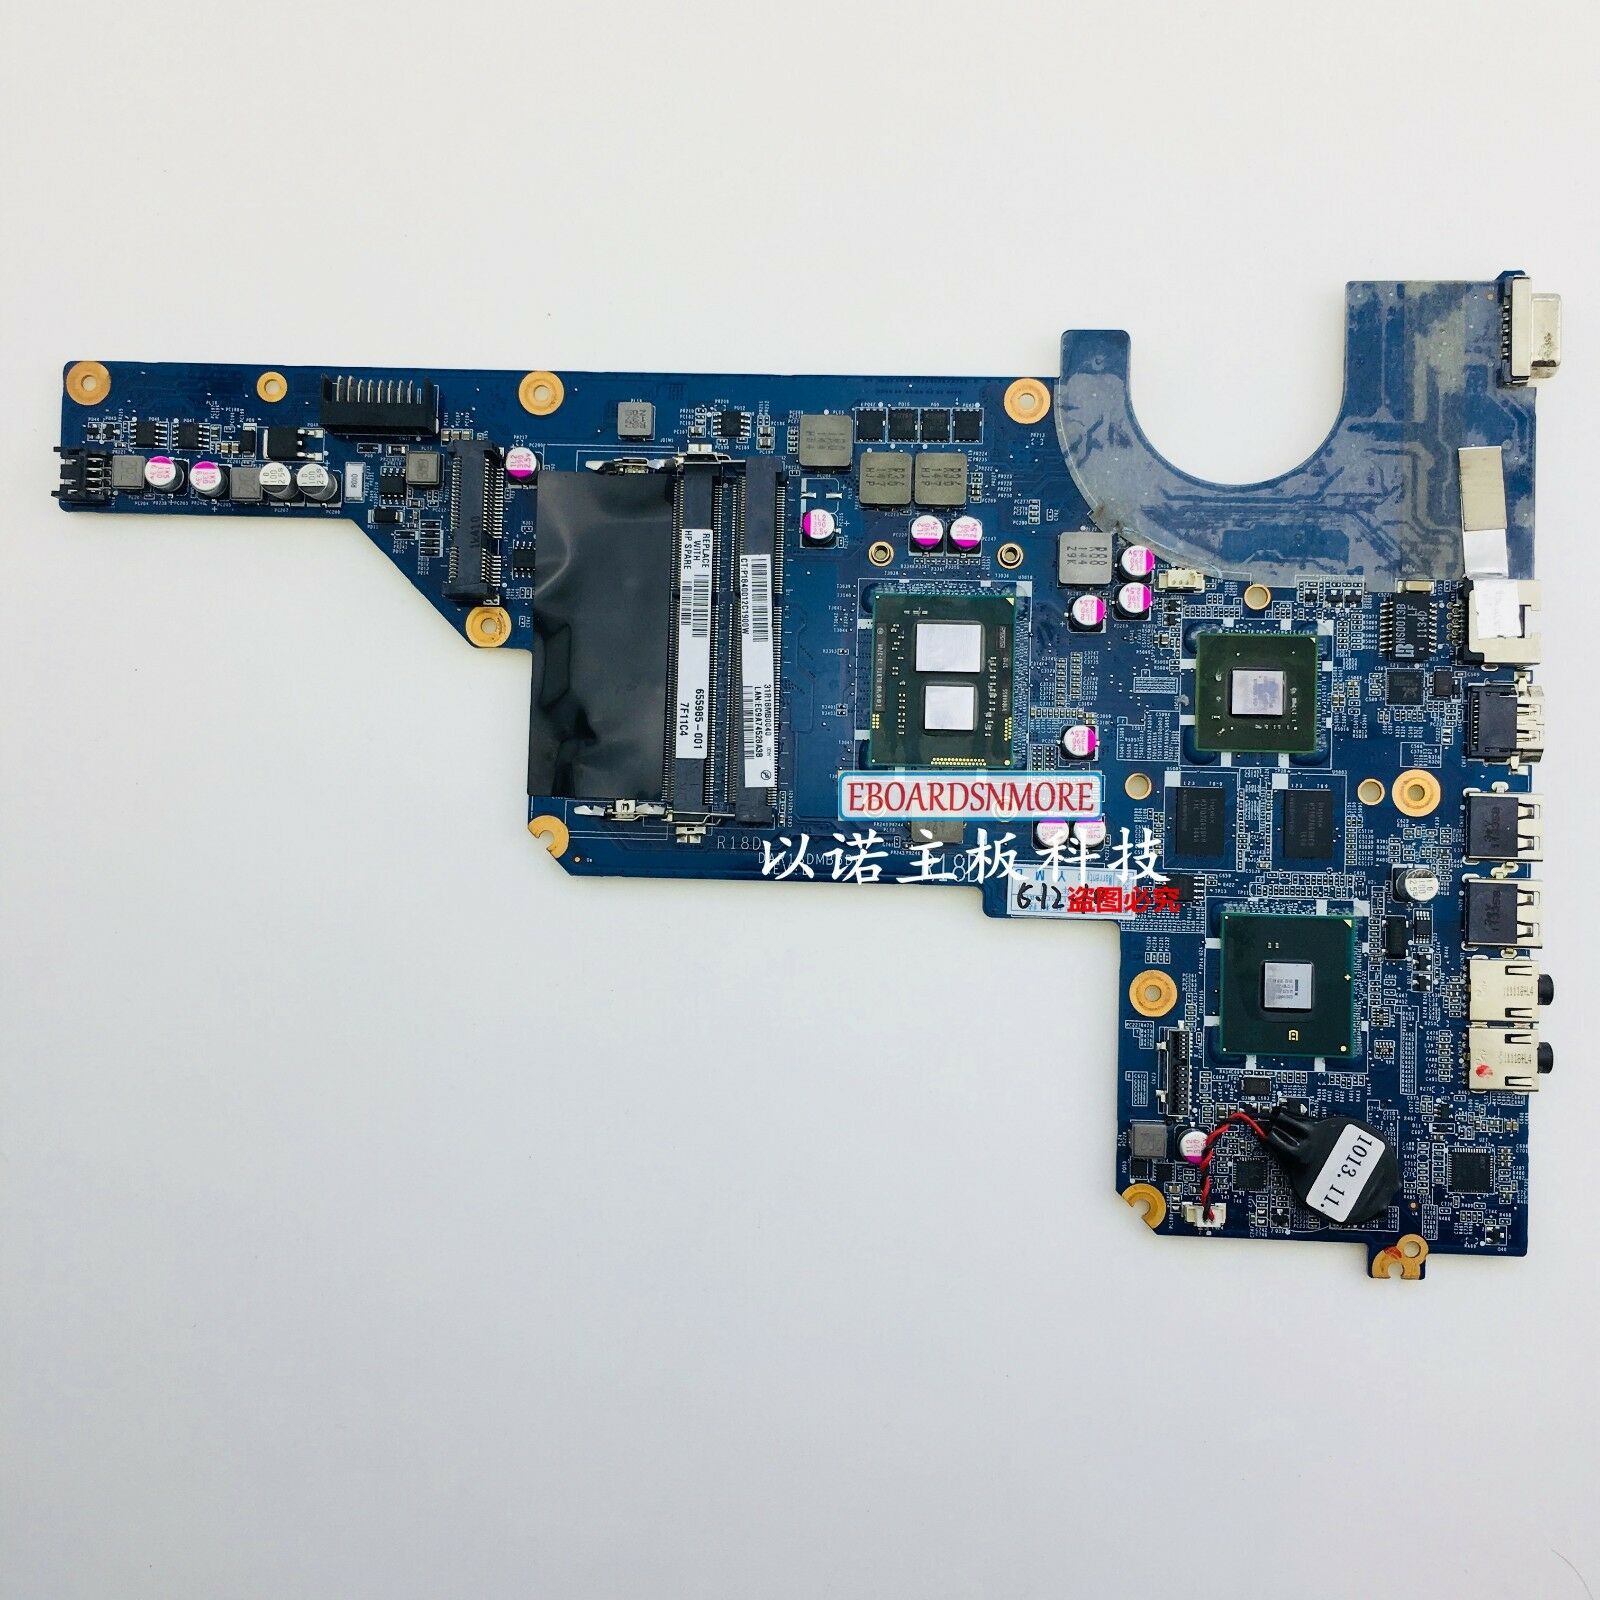 655985-001 HP G4 G6 G7 Laptop Motherboard DDR3 DAR18DMB6D0,with cpu I3-370M Compatible CPU Brand: Intel Fea